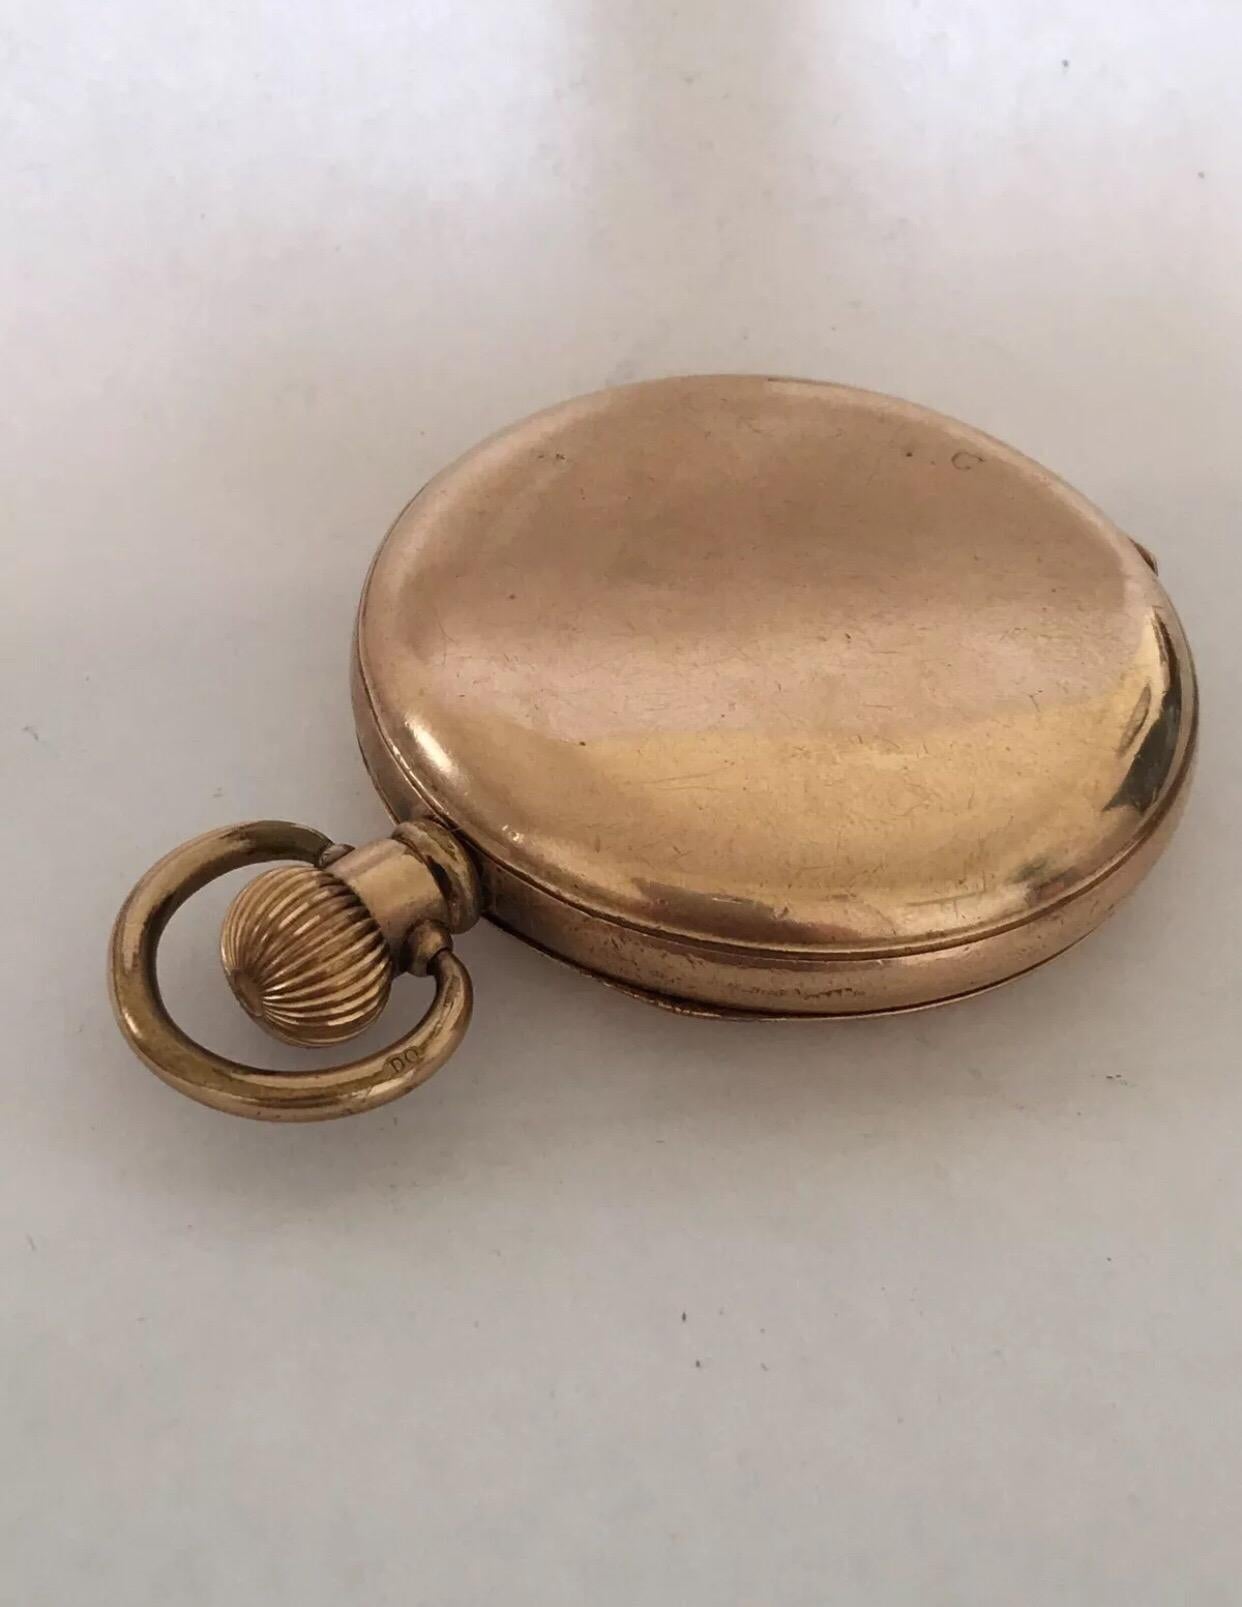 Gold Plated Dennison Case Full Hunter Swiss Made Pocket Watch.


This watch is in good working condition. There is a visible tiny crack on the dial near 5 o’clock as shown on photo. Some wear and tear on the side case and metal ring